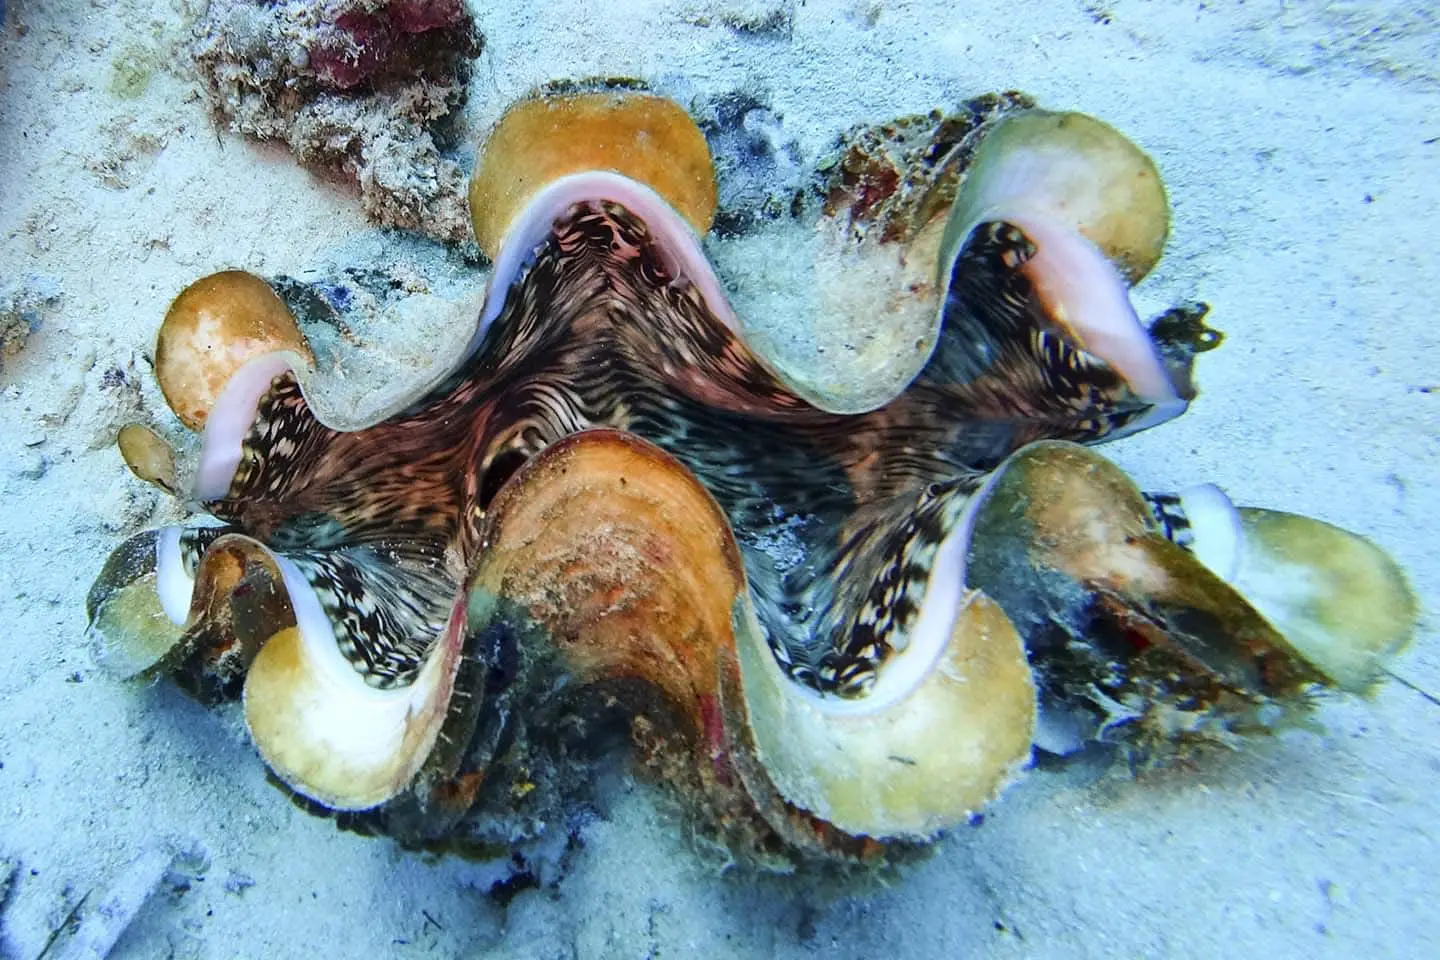 Siquijor Scuba Diving things to see underwater: giant clams